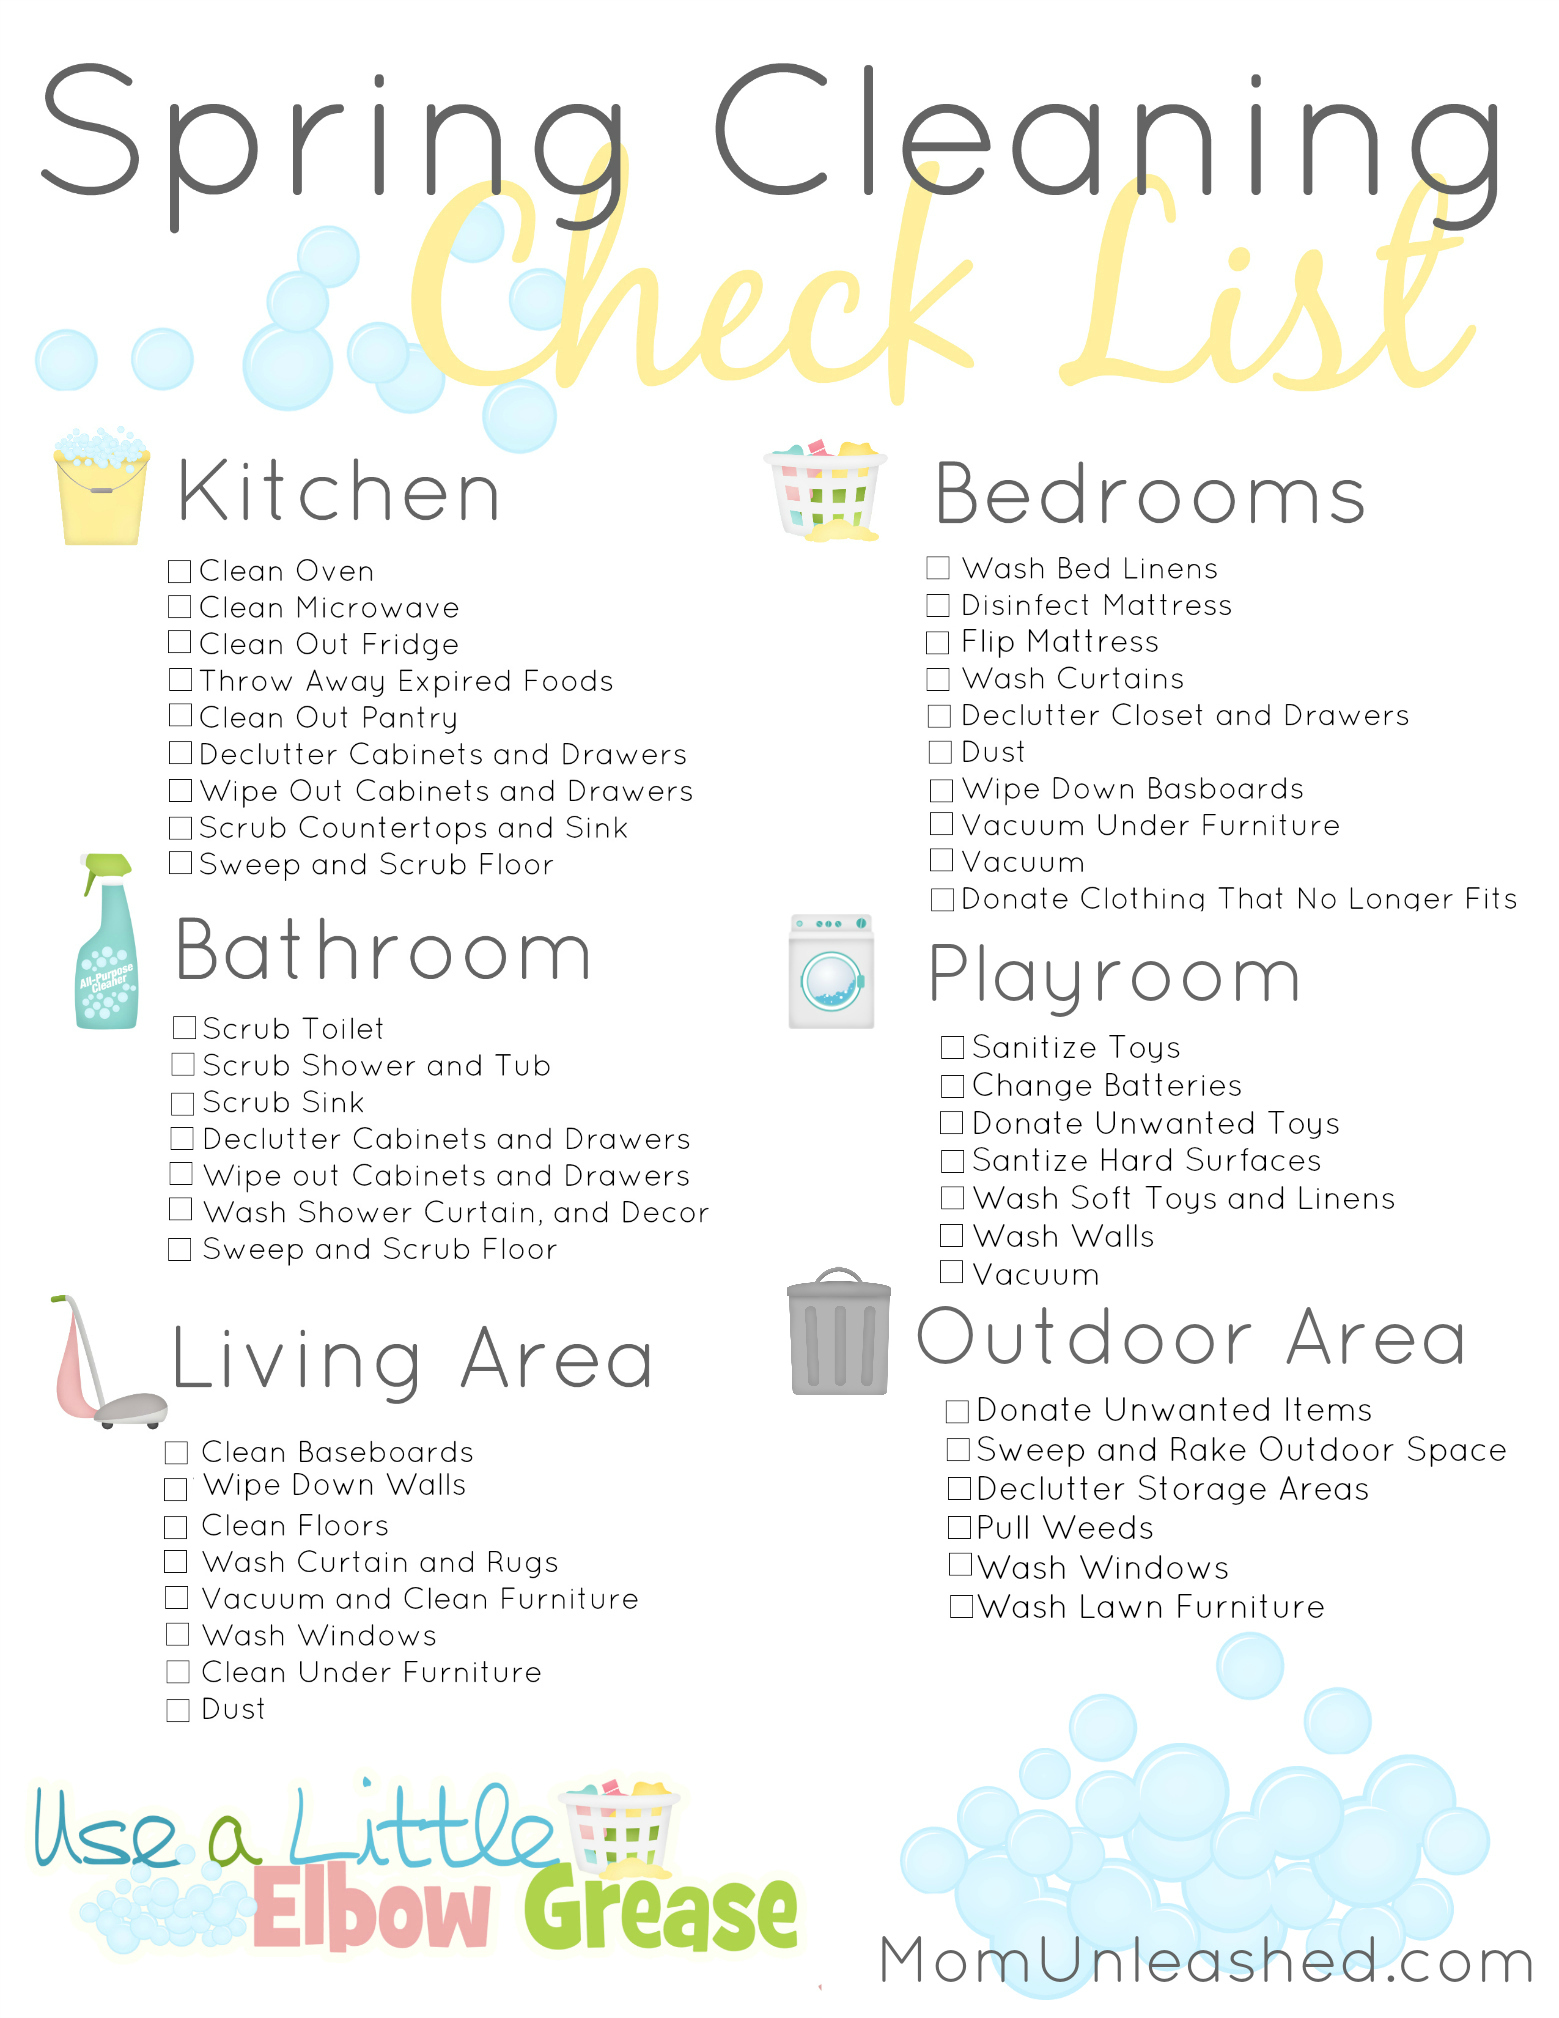 Spring Cleaning List Printable Template Business PSD, Excel, Word, PDF